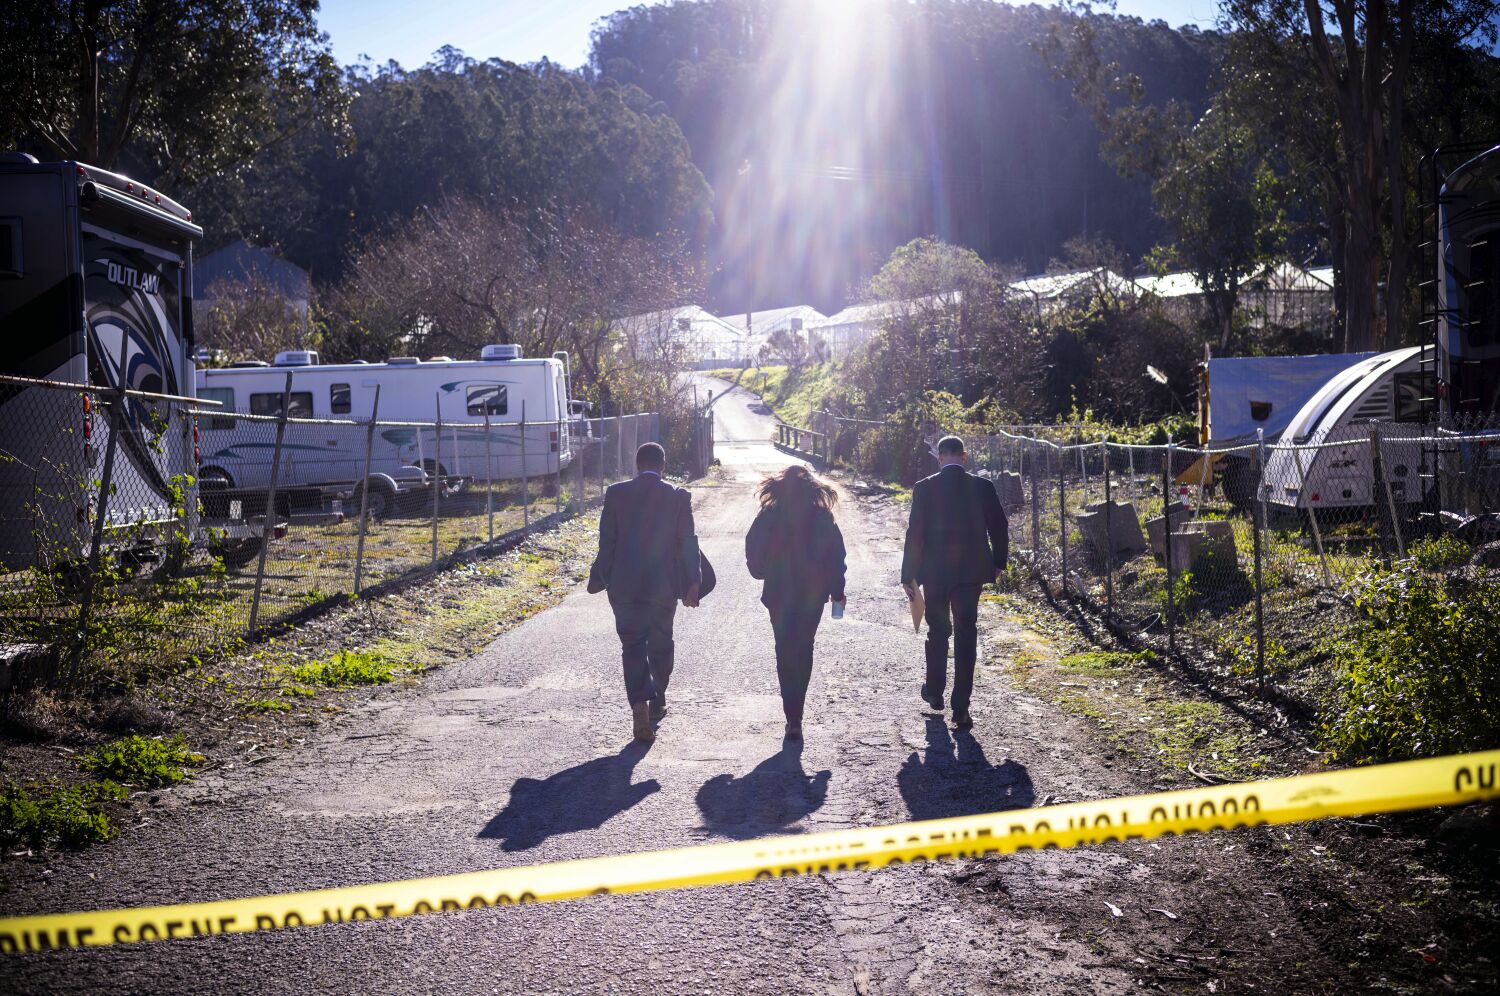 Half Moon Bay suspect 'snapped' before shooting co-workers, sheriff says